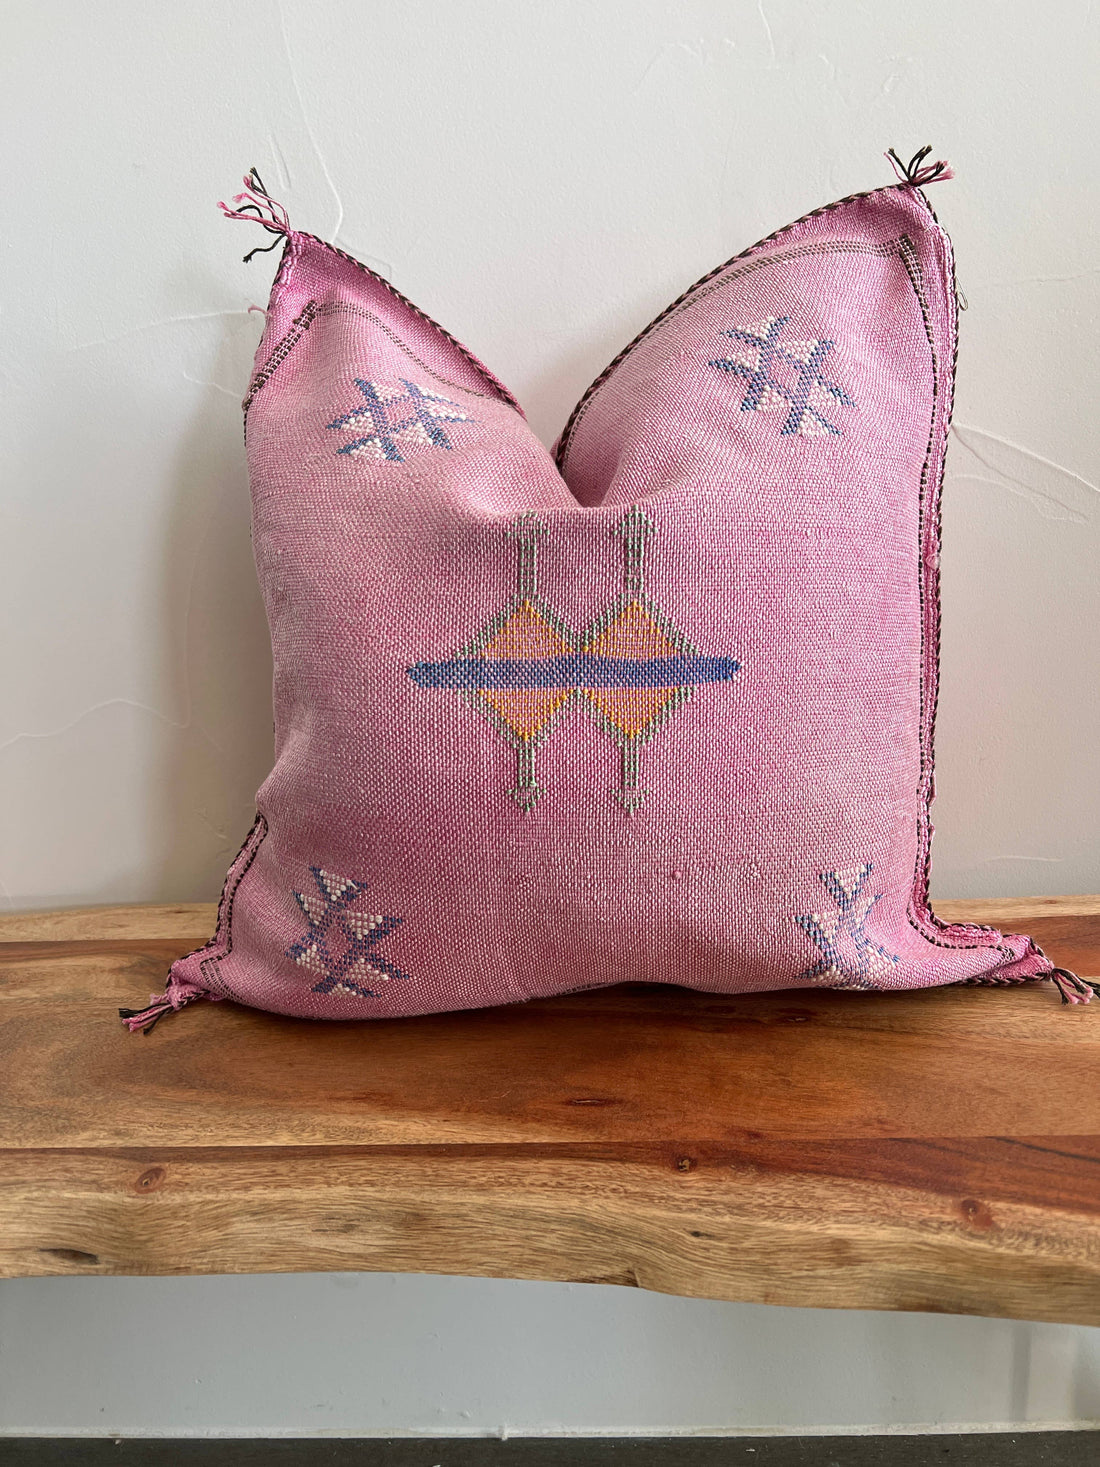 Handmade Moroccan cactus silk pillow covers, 20x20 inch